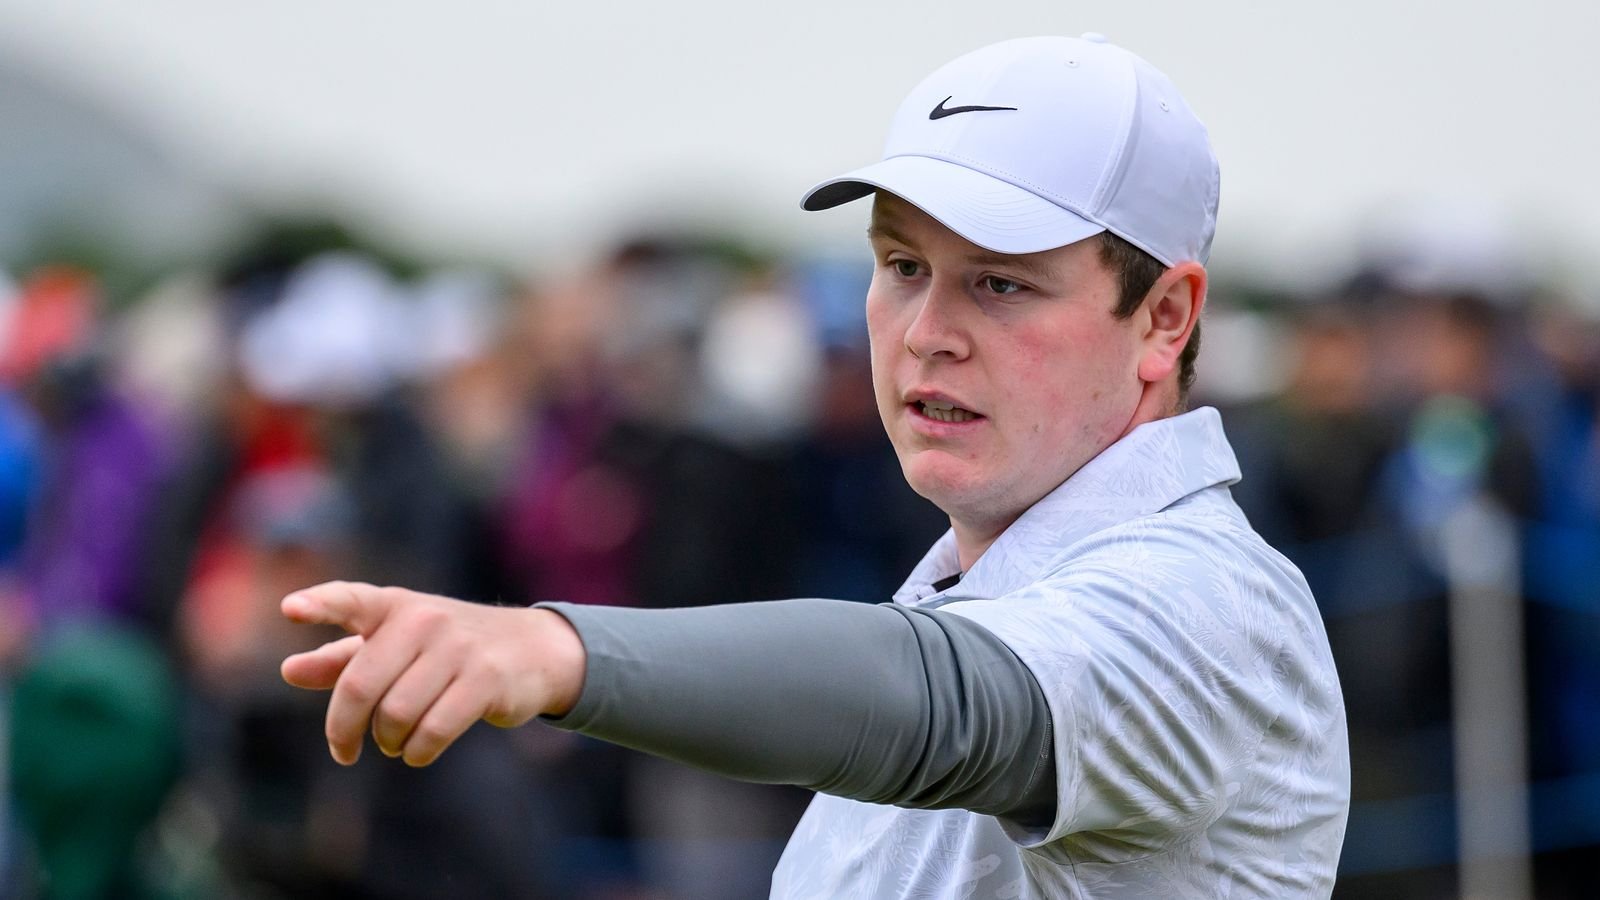 Scottish Open: Robert MacIntyre two shots off lead ahead of final round and pushing for home triumph | Golf News